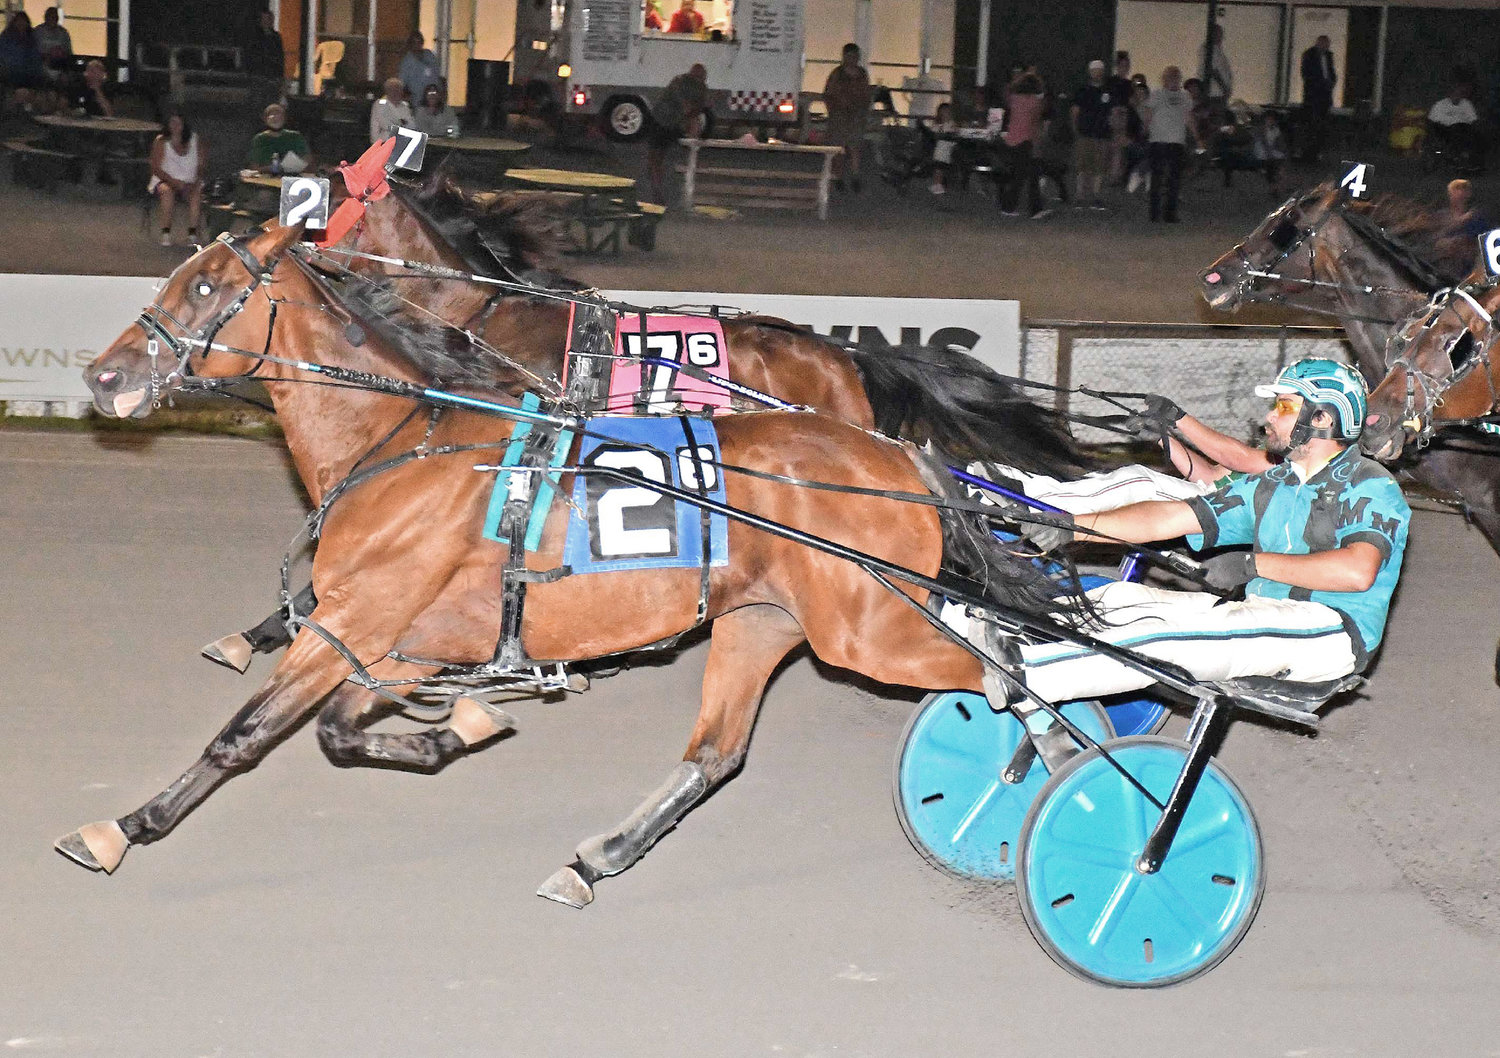 Michael Miller drives American JJ to victory on Saturday night in the featured $6,600 trot with wild finish at Vernon Downs.